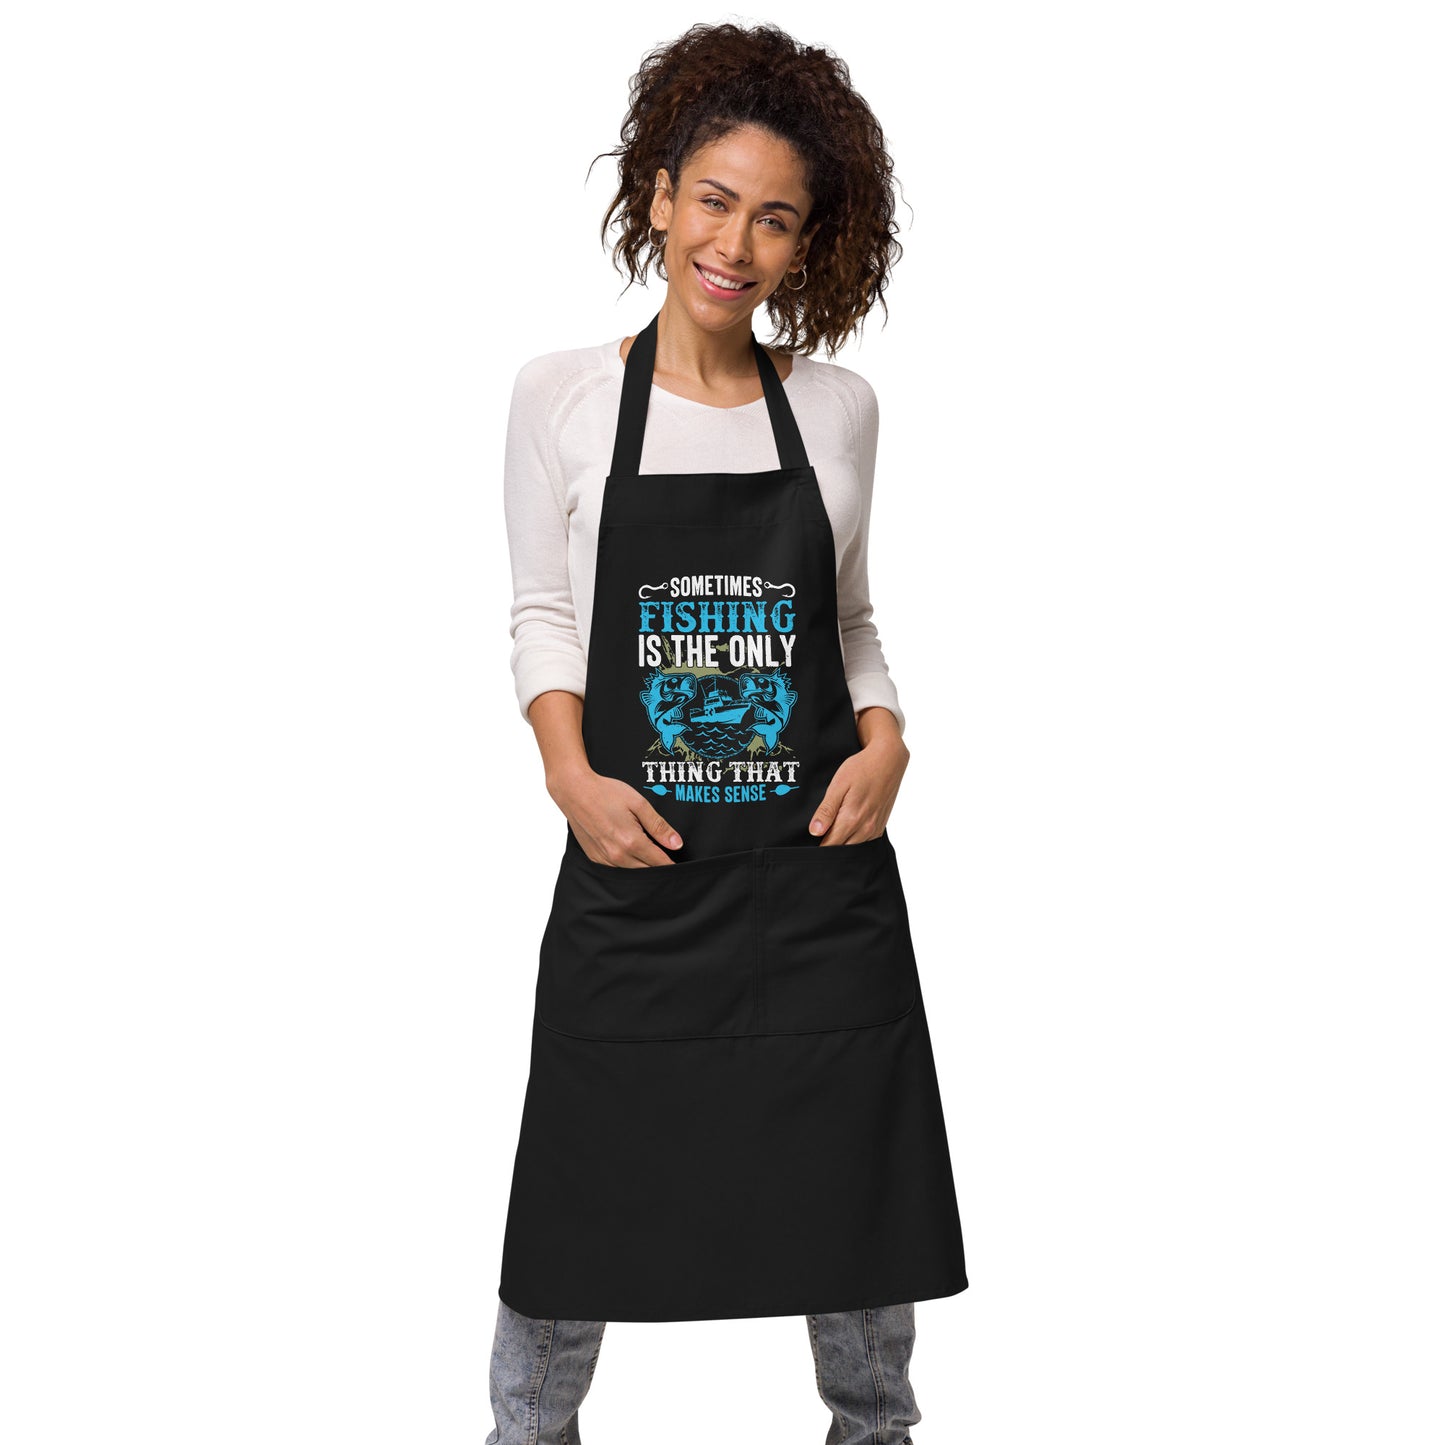 Sometimes the Only Thing That Makes Sense is Fishing Organic cotton apron